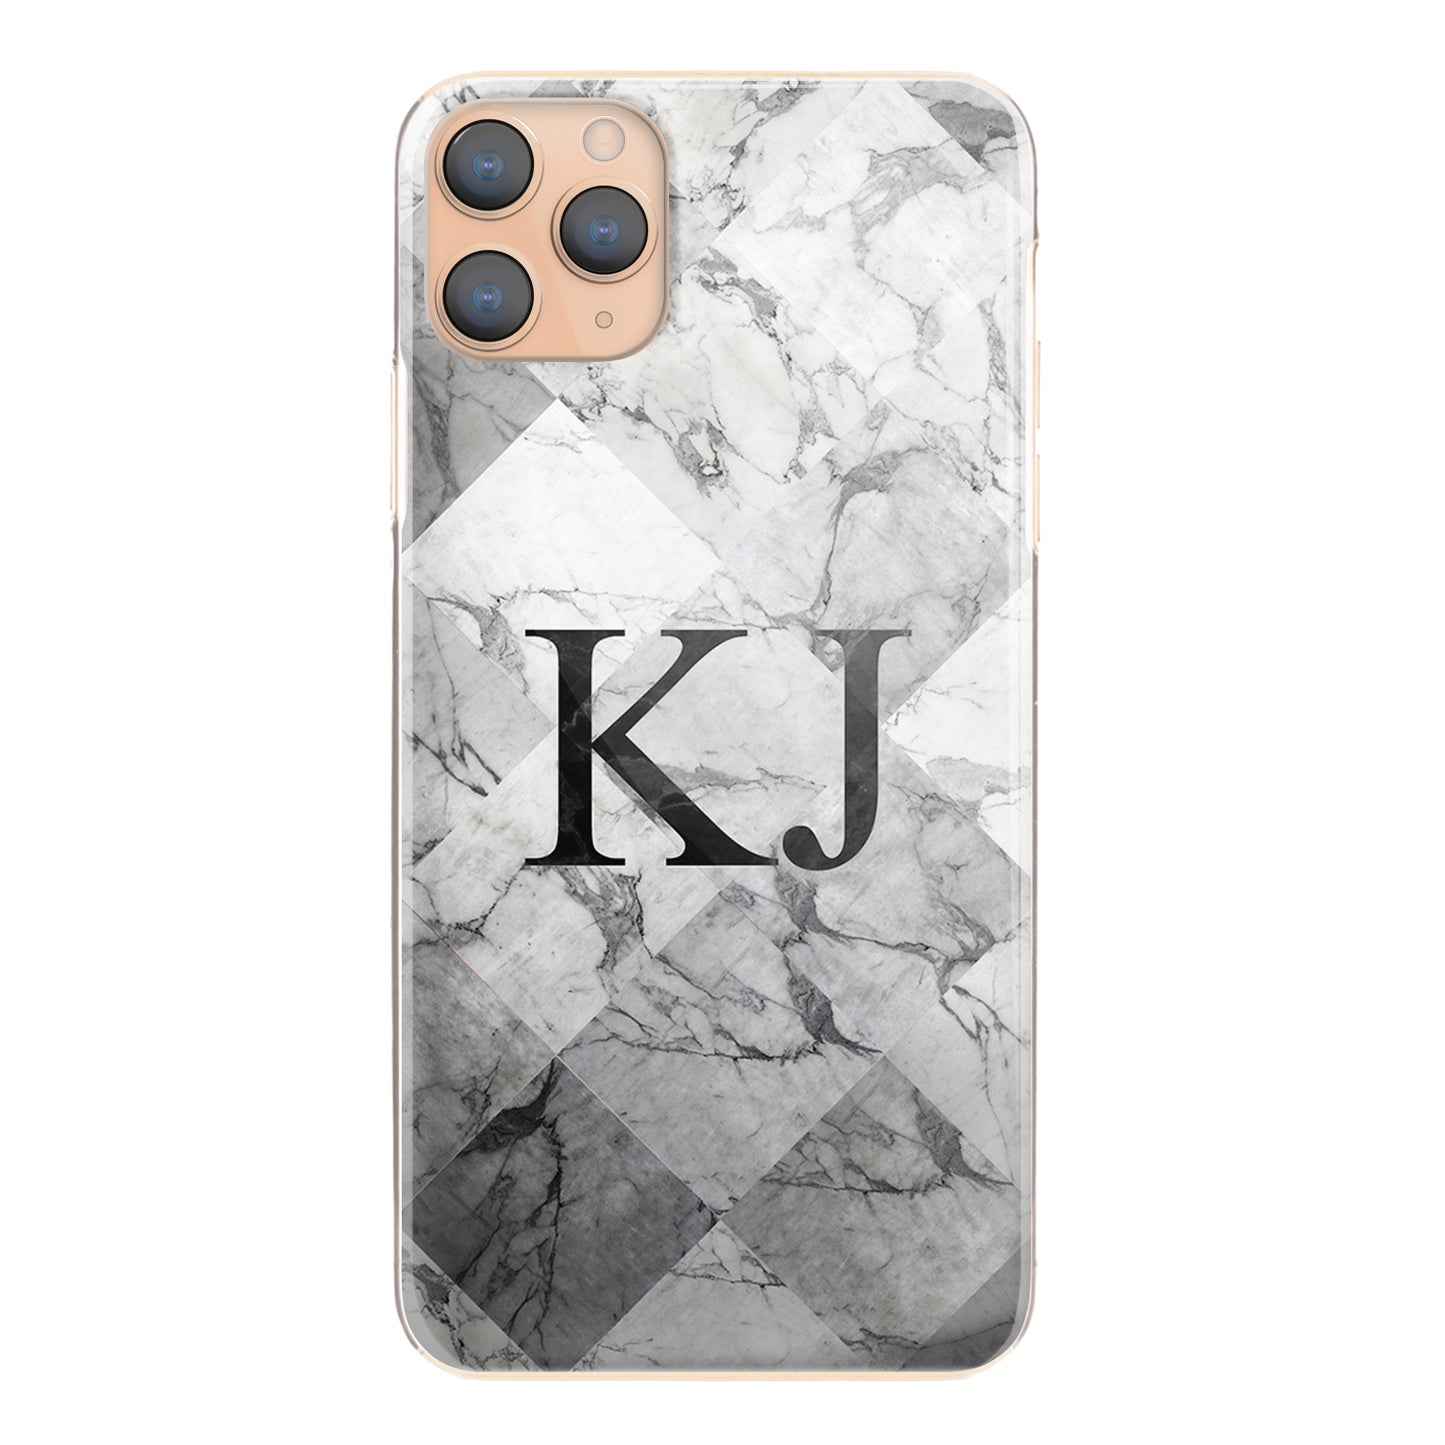 Personalised Huawei Phone Hard Case with Traditional Initials on Patterned Grey Marble